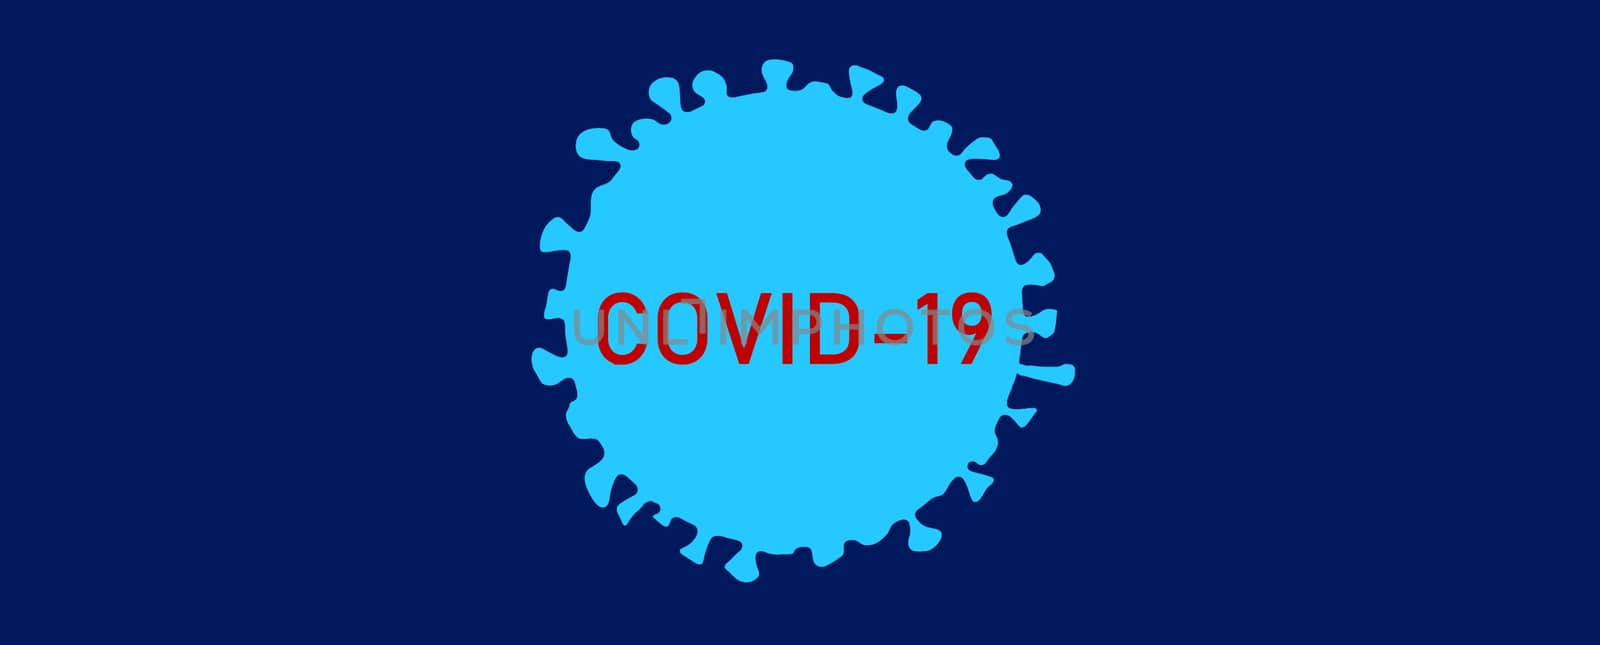 COVID-19 Coronavirus graphic design of corona virus drawing on blue medical background panoramic banner with text title.